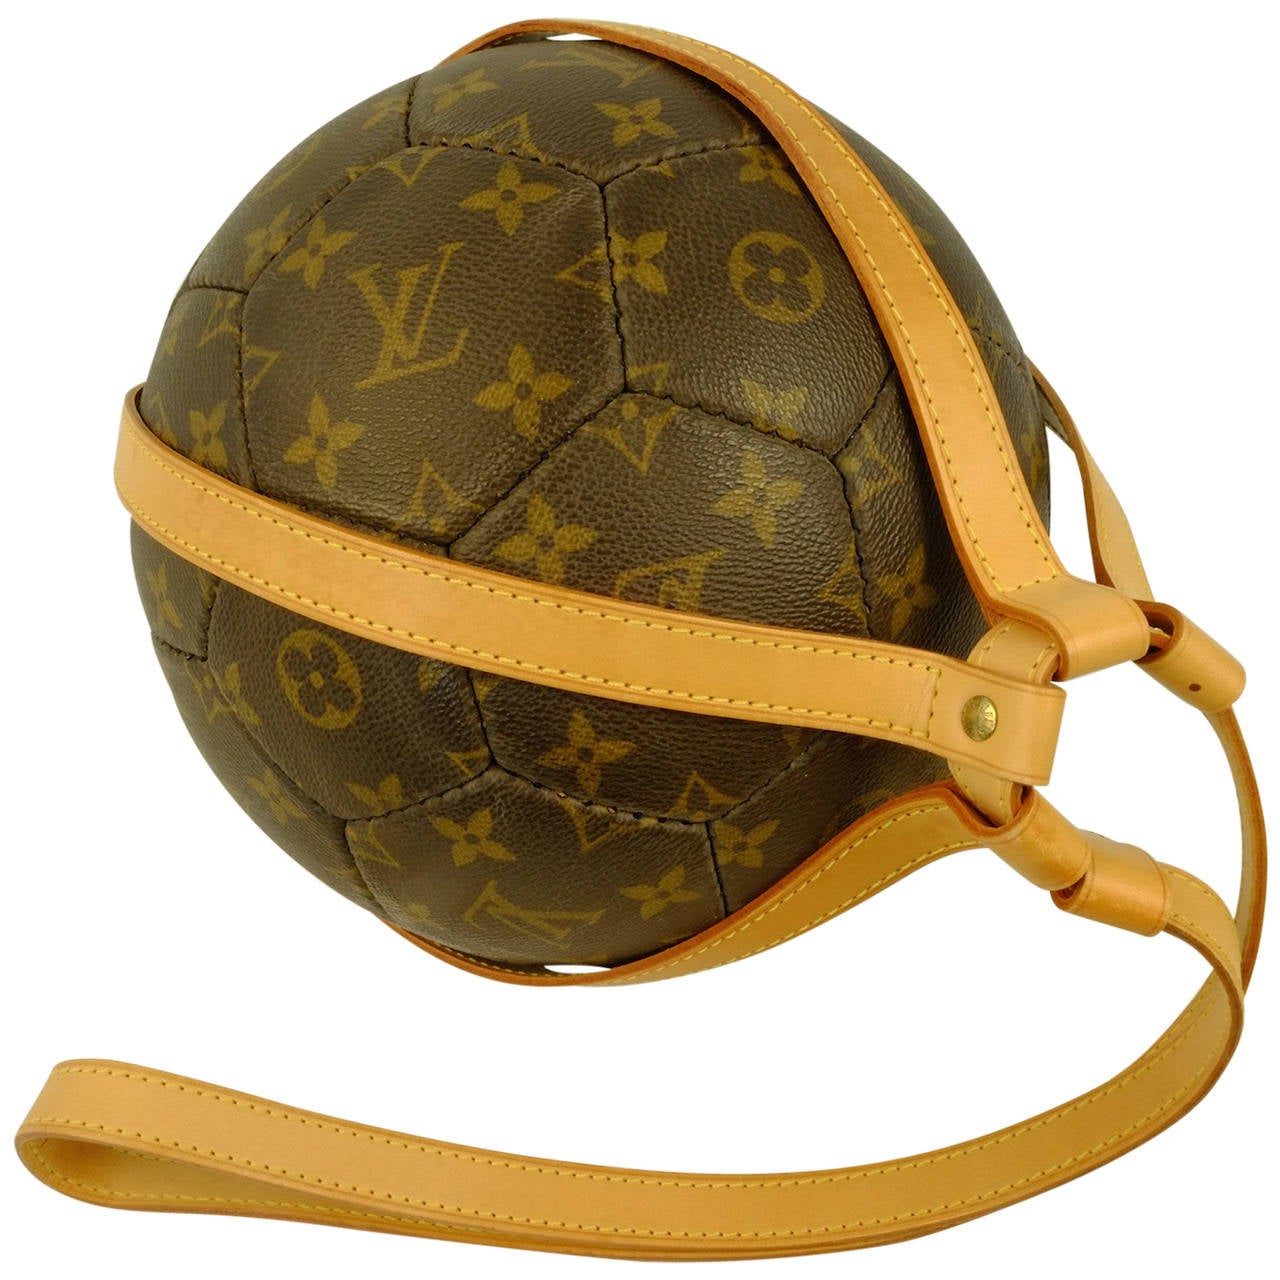 Louis Vuitton Limited Edition Soccer Ball World Cup 1998 at